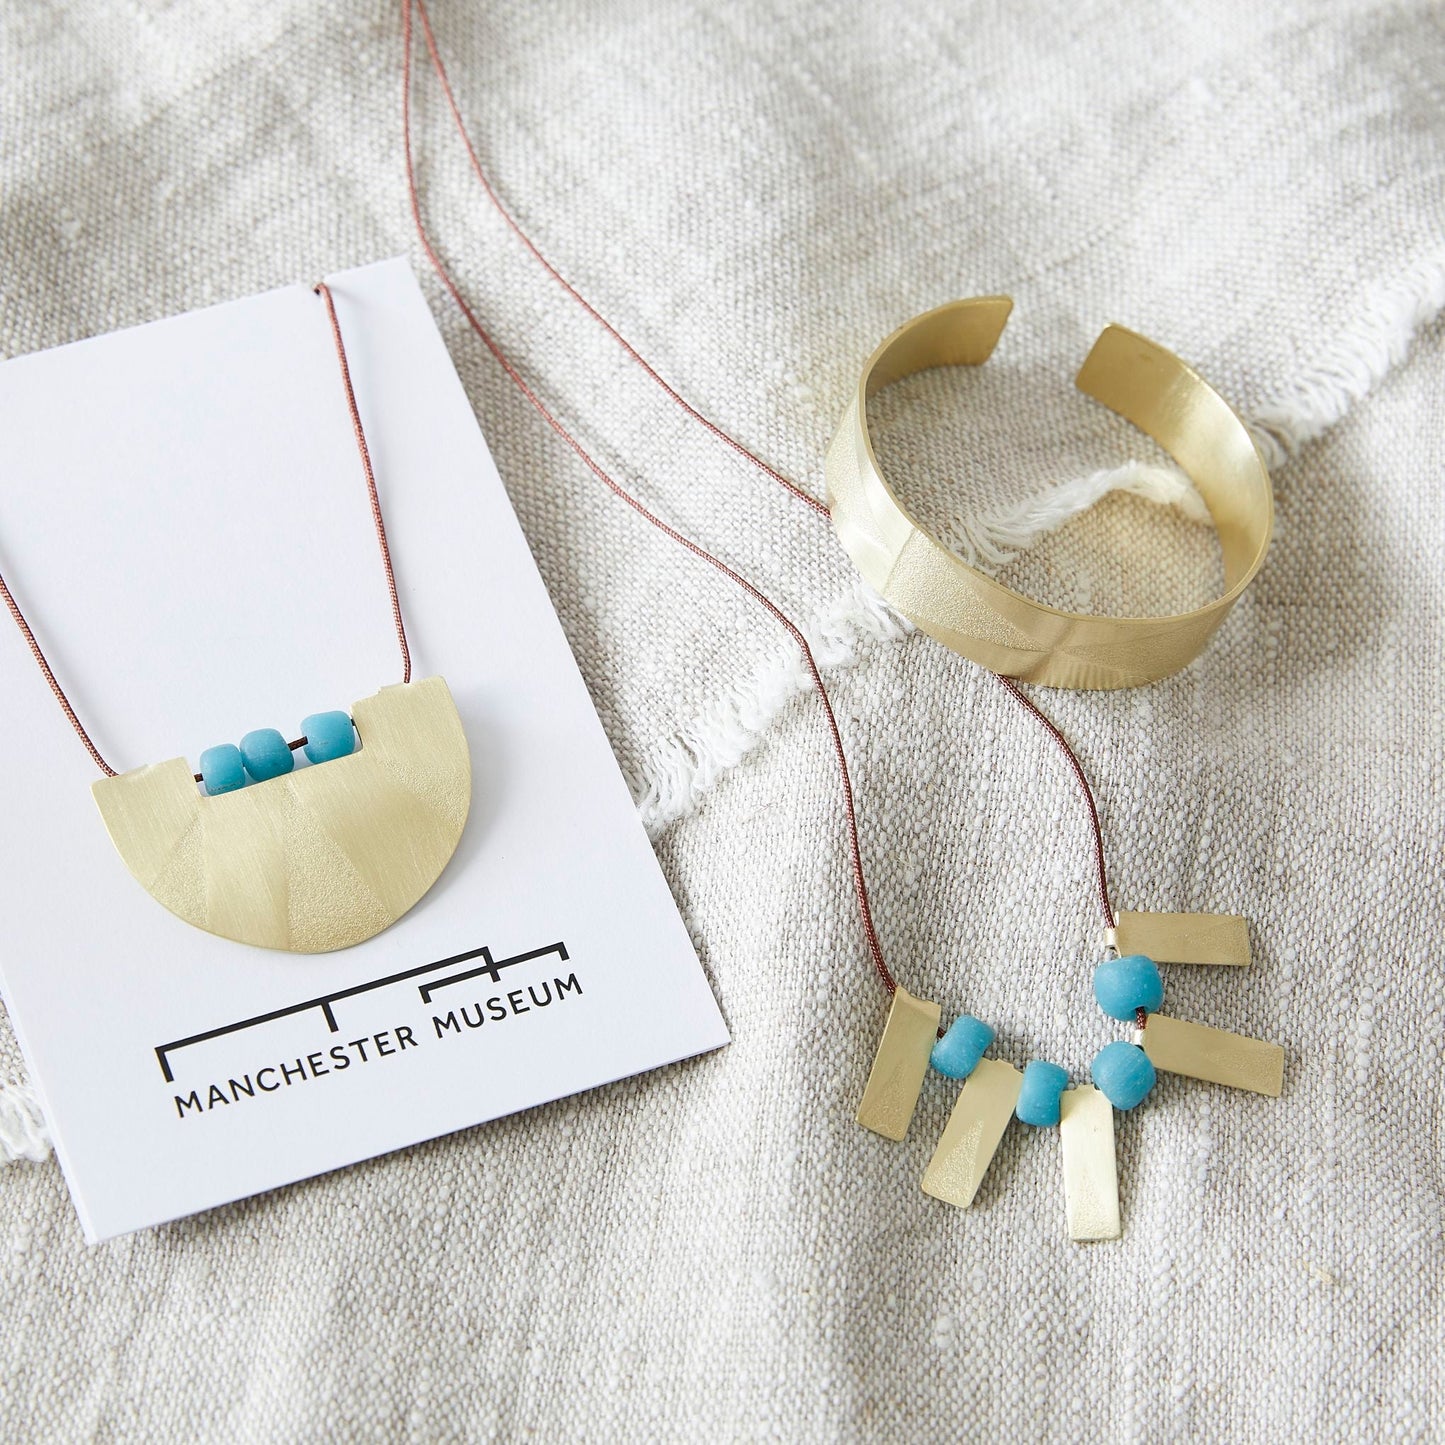 Lifestyle shot on natural linen with the semi-circular necklace to the left on the white backing card with the brass bangle and rectangular pendants necklace on the right.